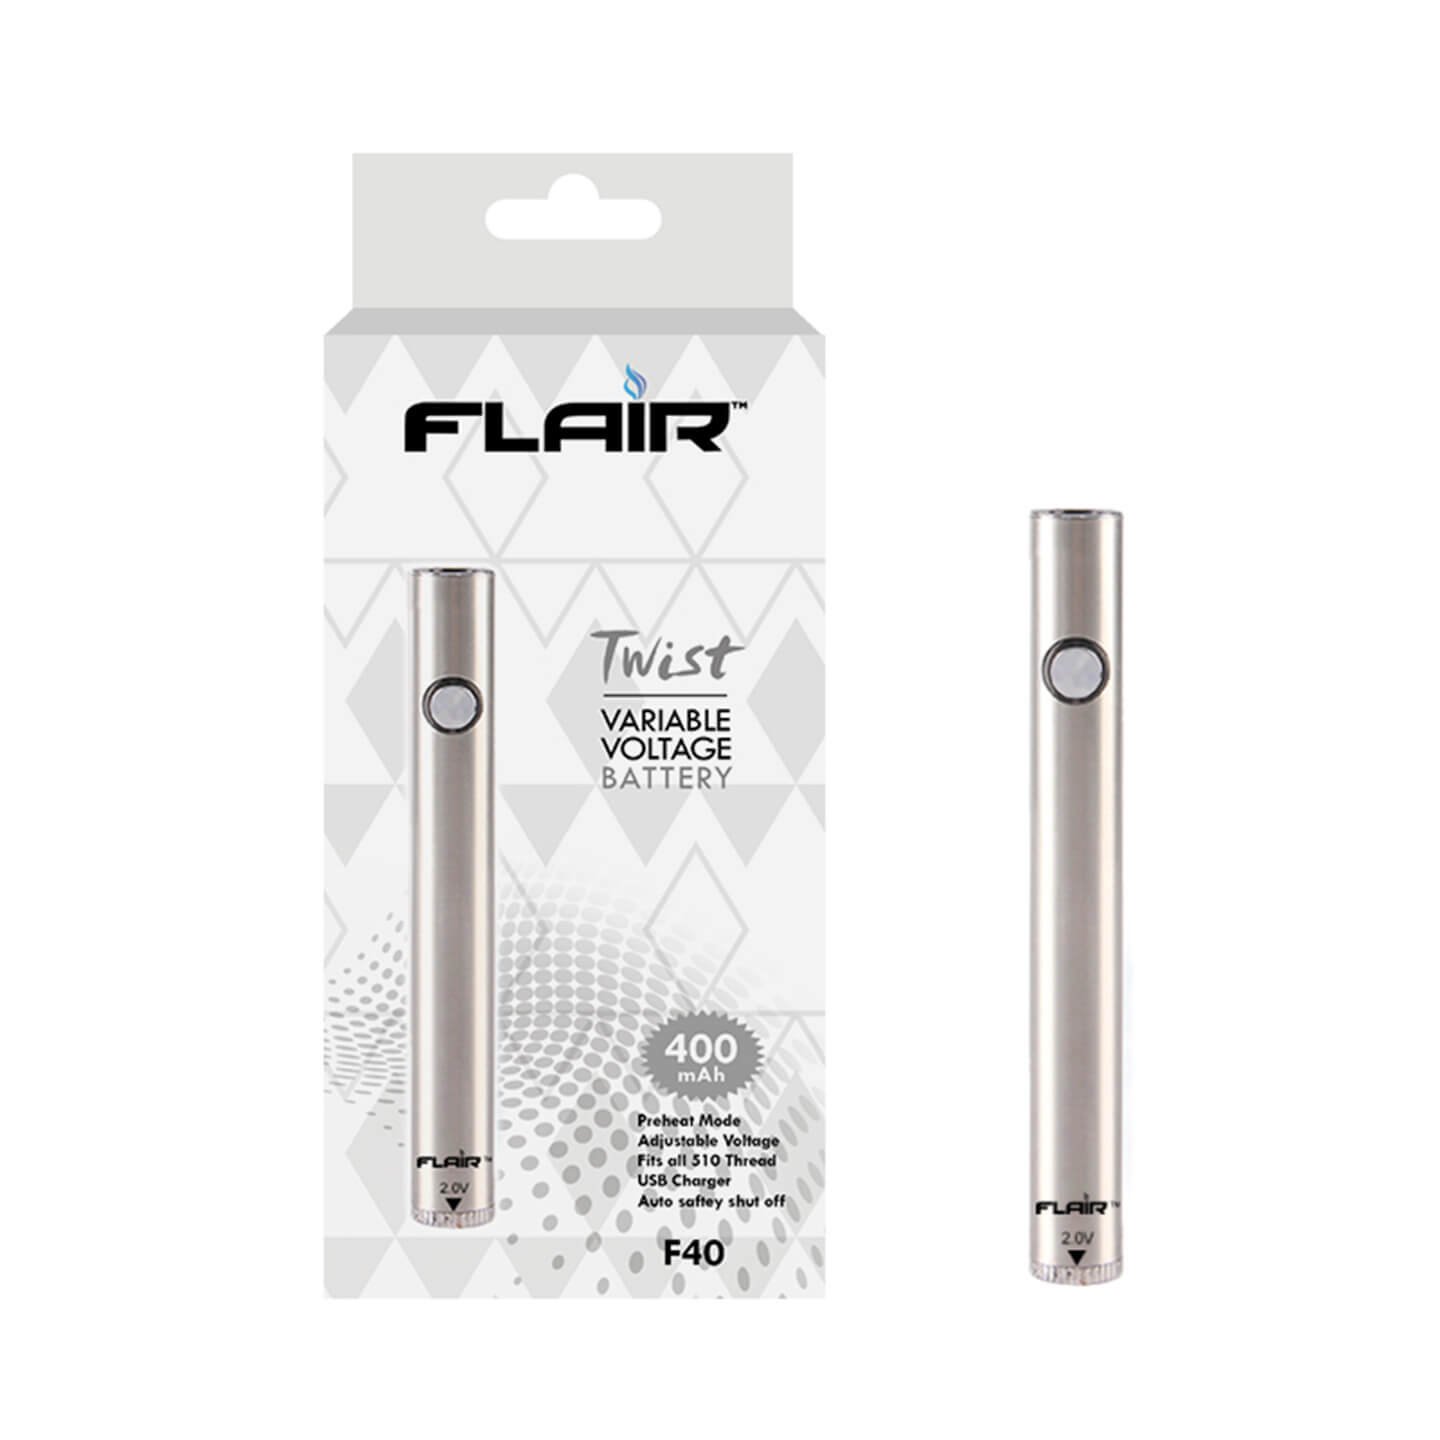 Flair Twist variable voltage battery 400mah(Silver) F40